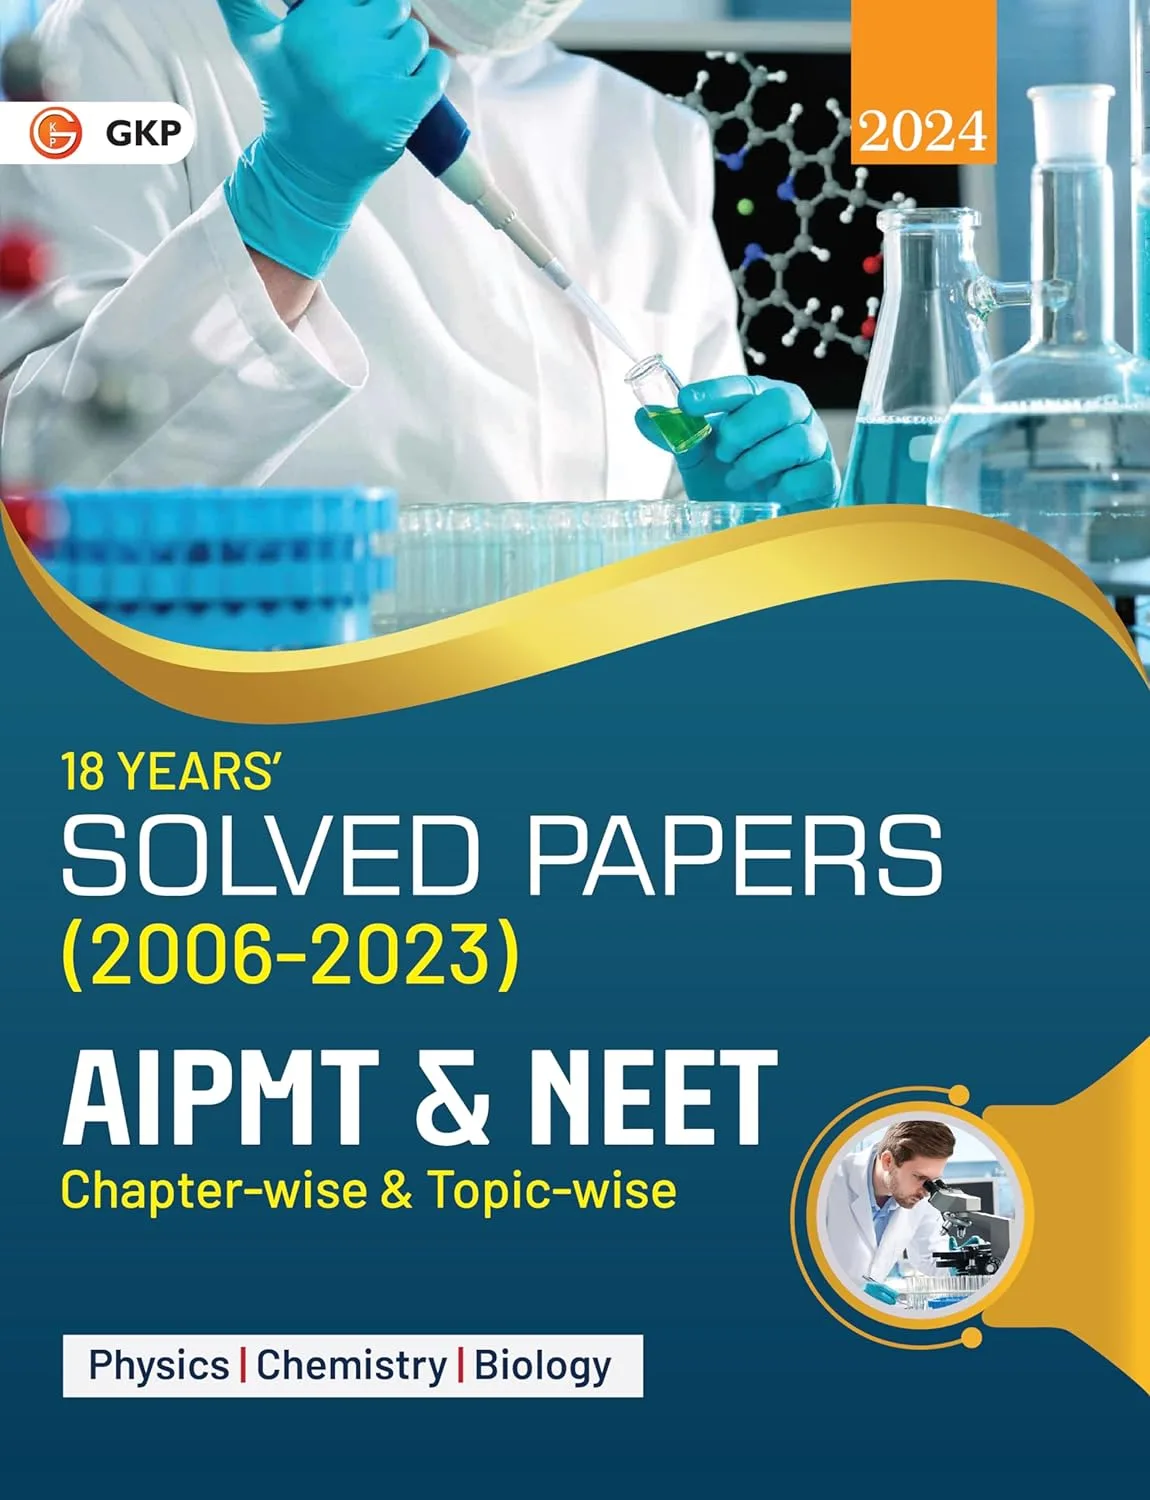 AIPMT & NEET Solved Papers